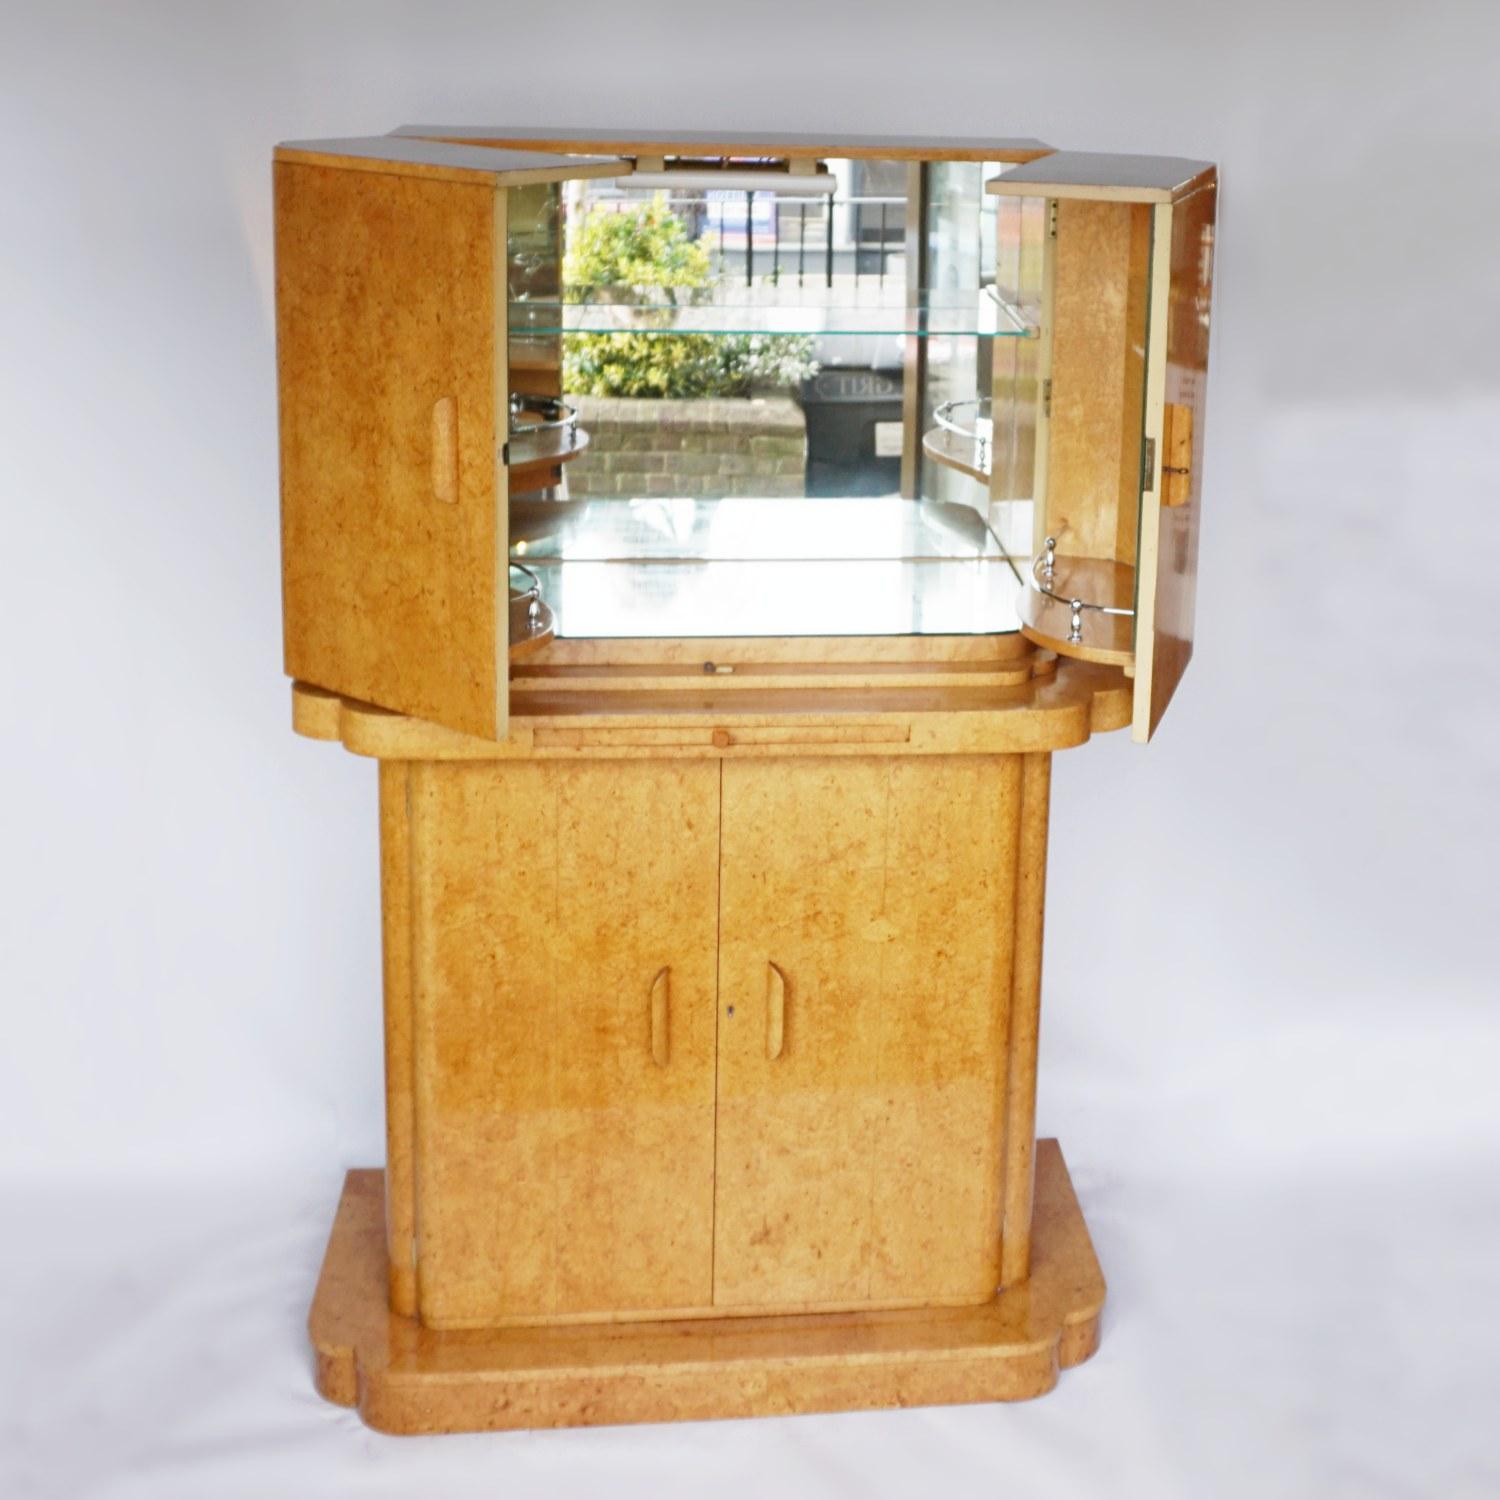 An Art Deco cocktail cabinet by Harry & Lou Epstein. Bleached burr walnut veneered on solid walnut and mahogany. Upper mirrored lit section with glass shelf. Mirrored pull out tray with original amber bakelite handle. Lower section opens to bottle